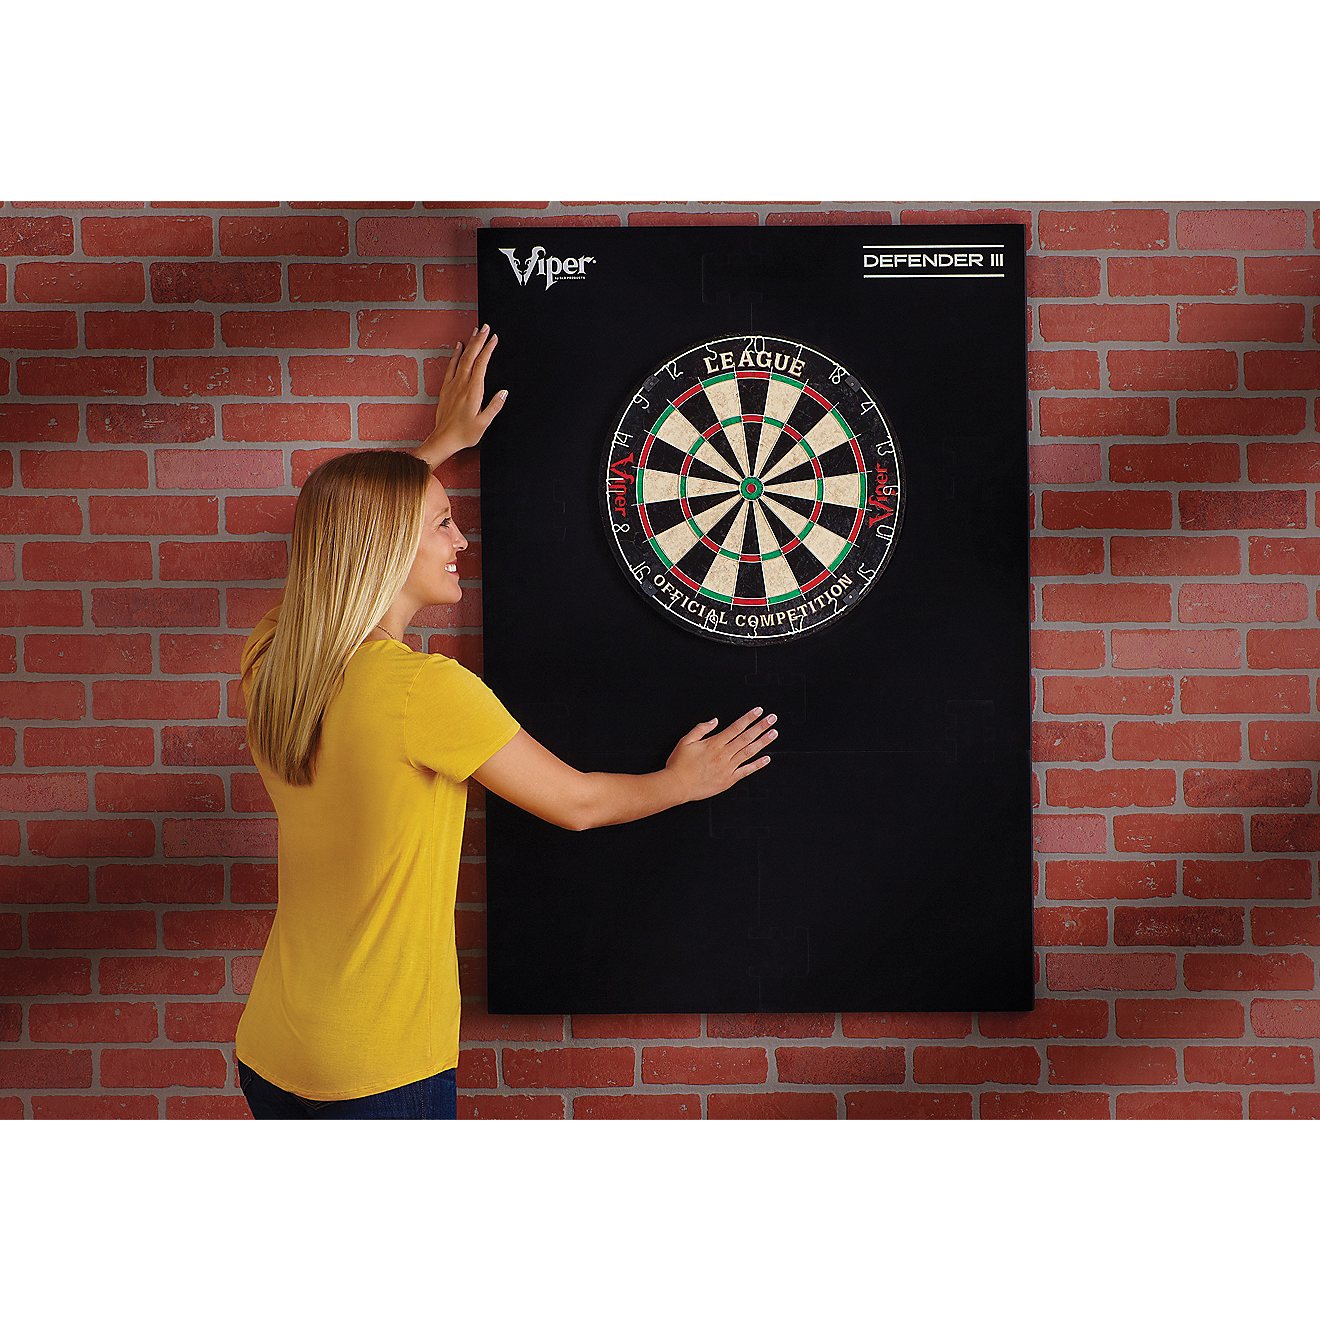 Viper Wall Defender III Dartboard Surround                                                                                       - view number 4